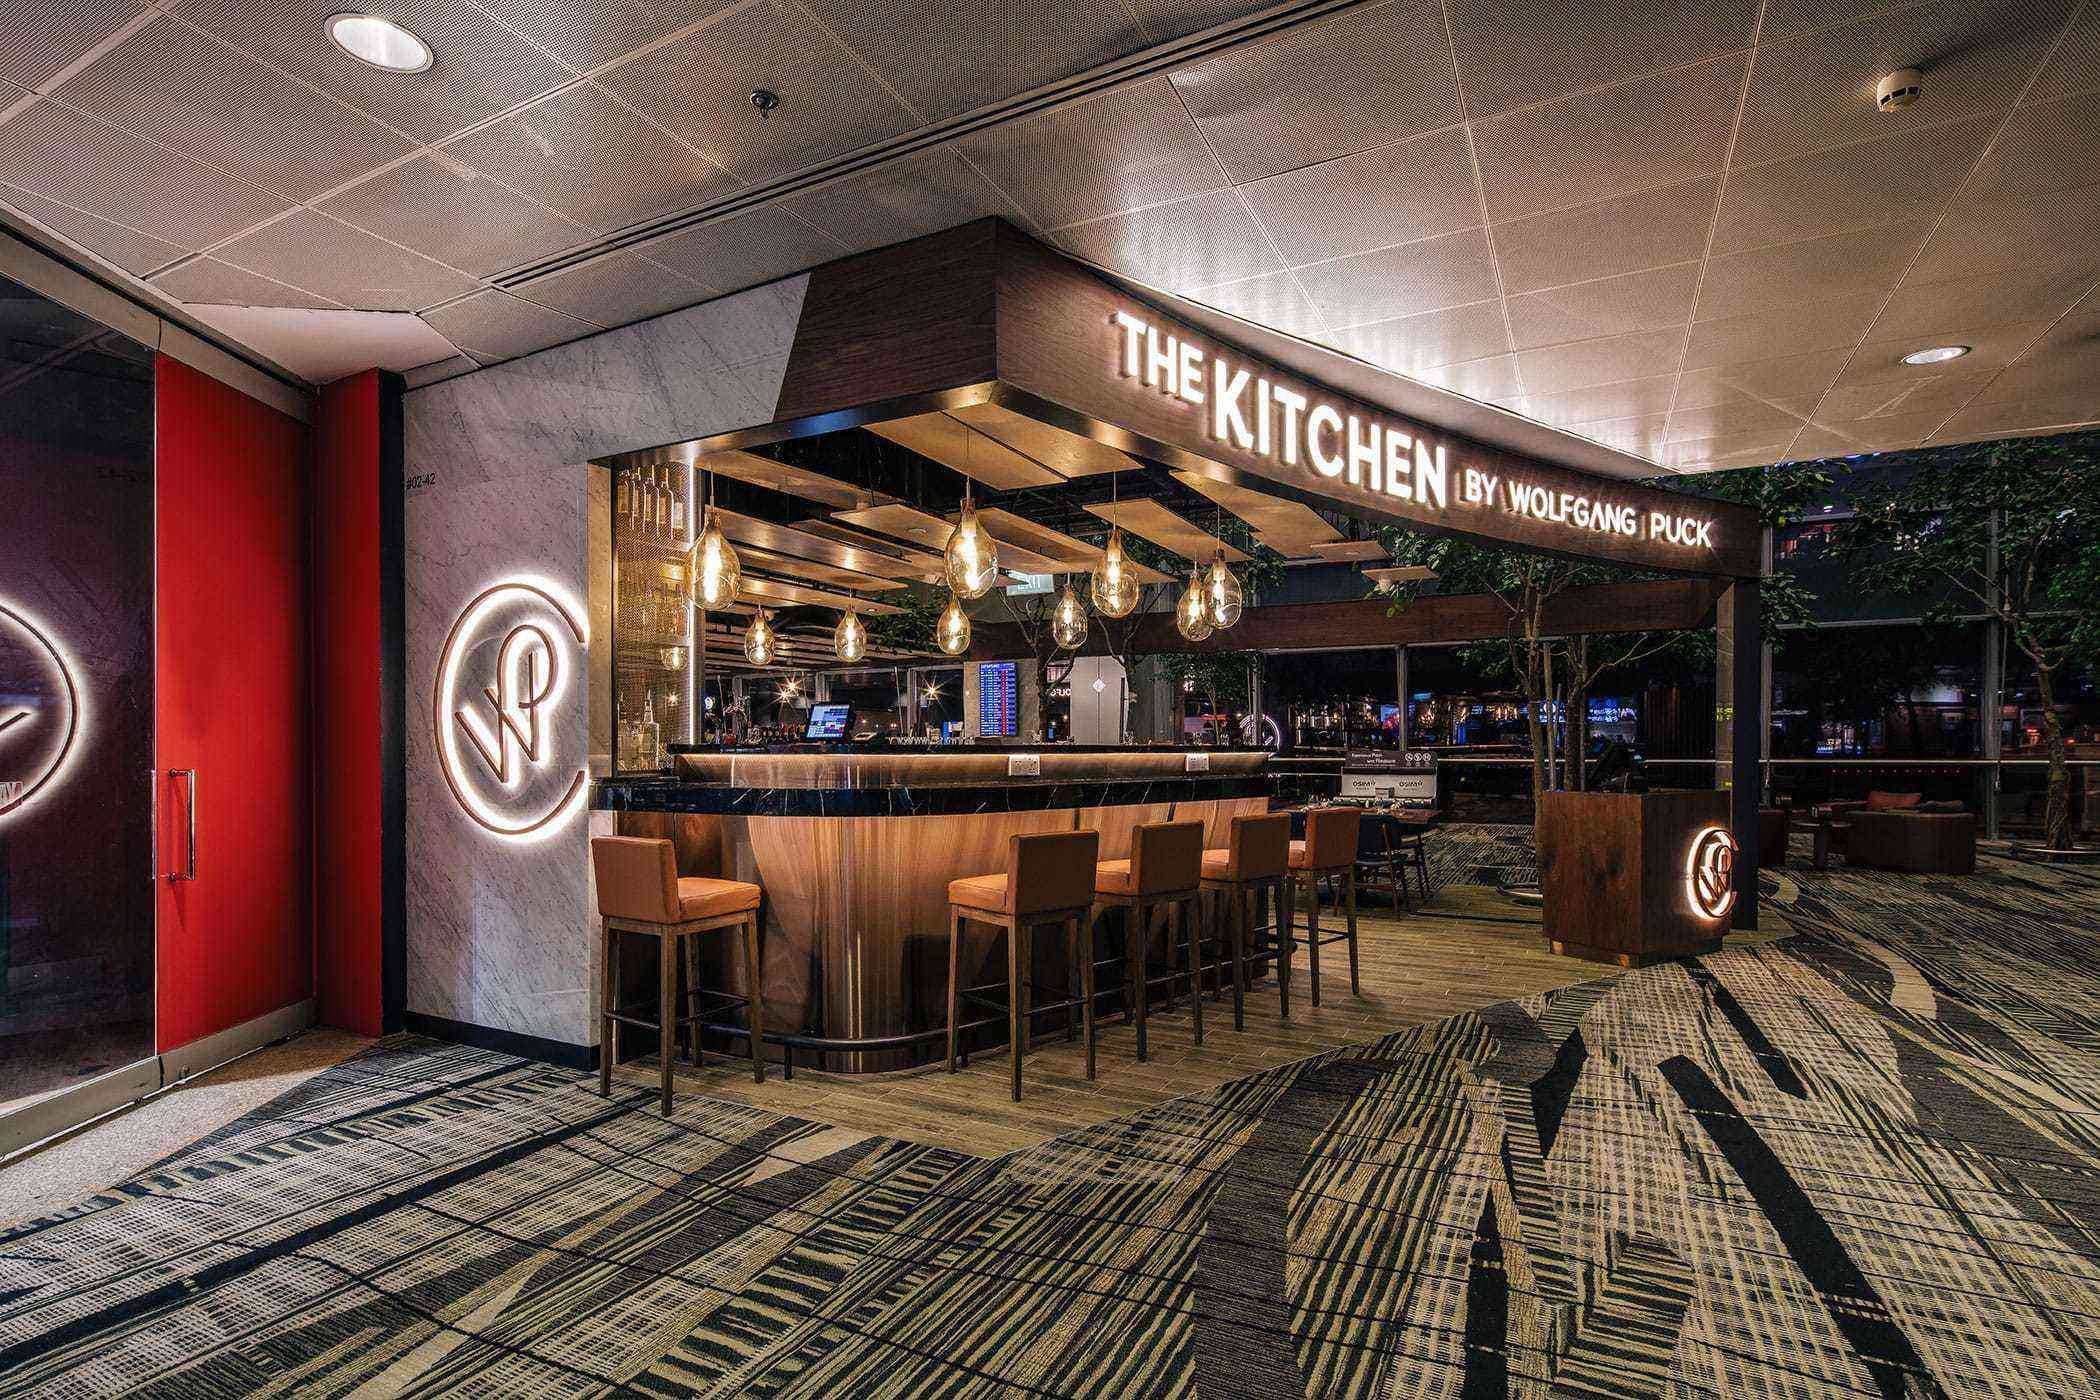 These Airport Restaurants Might Make You You’re Eating in an Airport Fodors Travel Guide